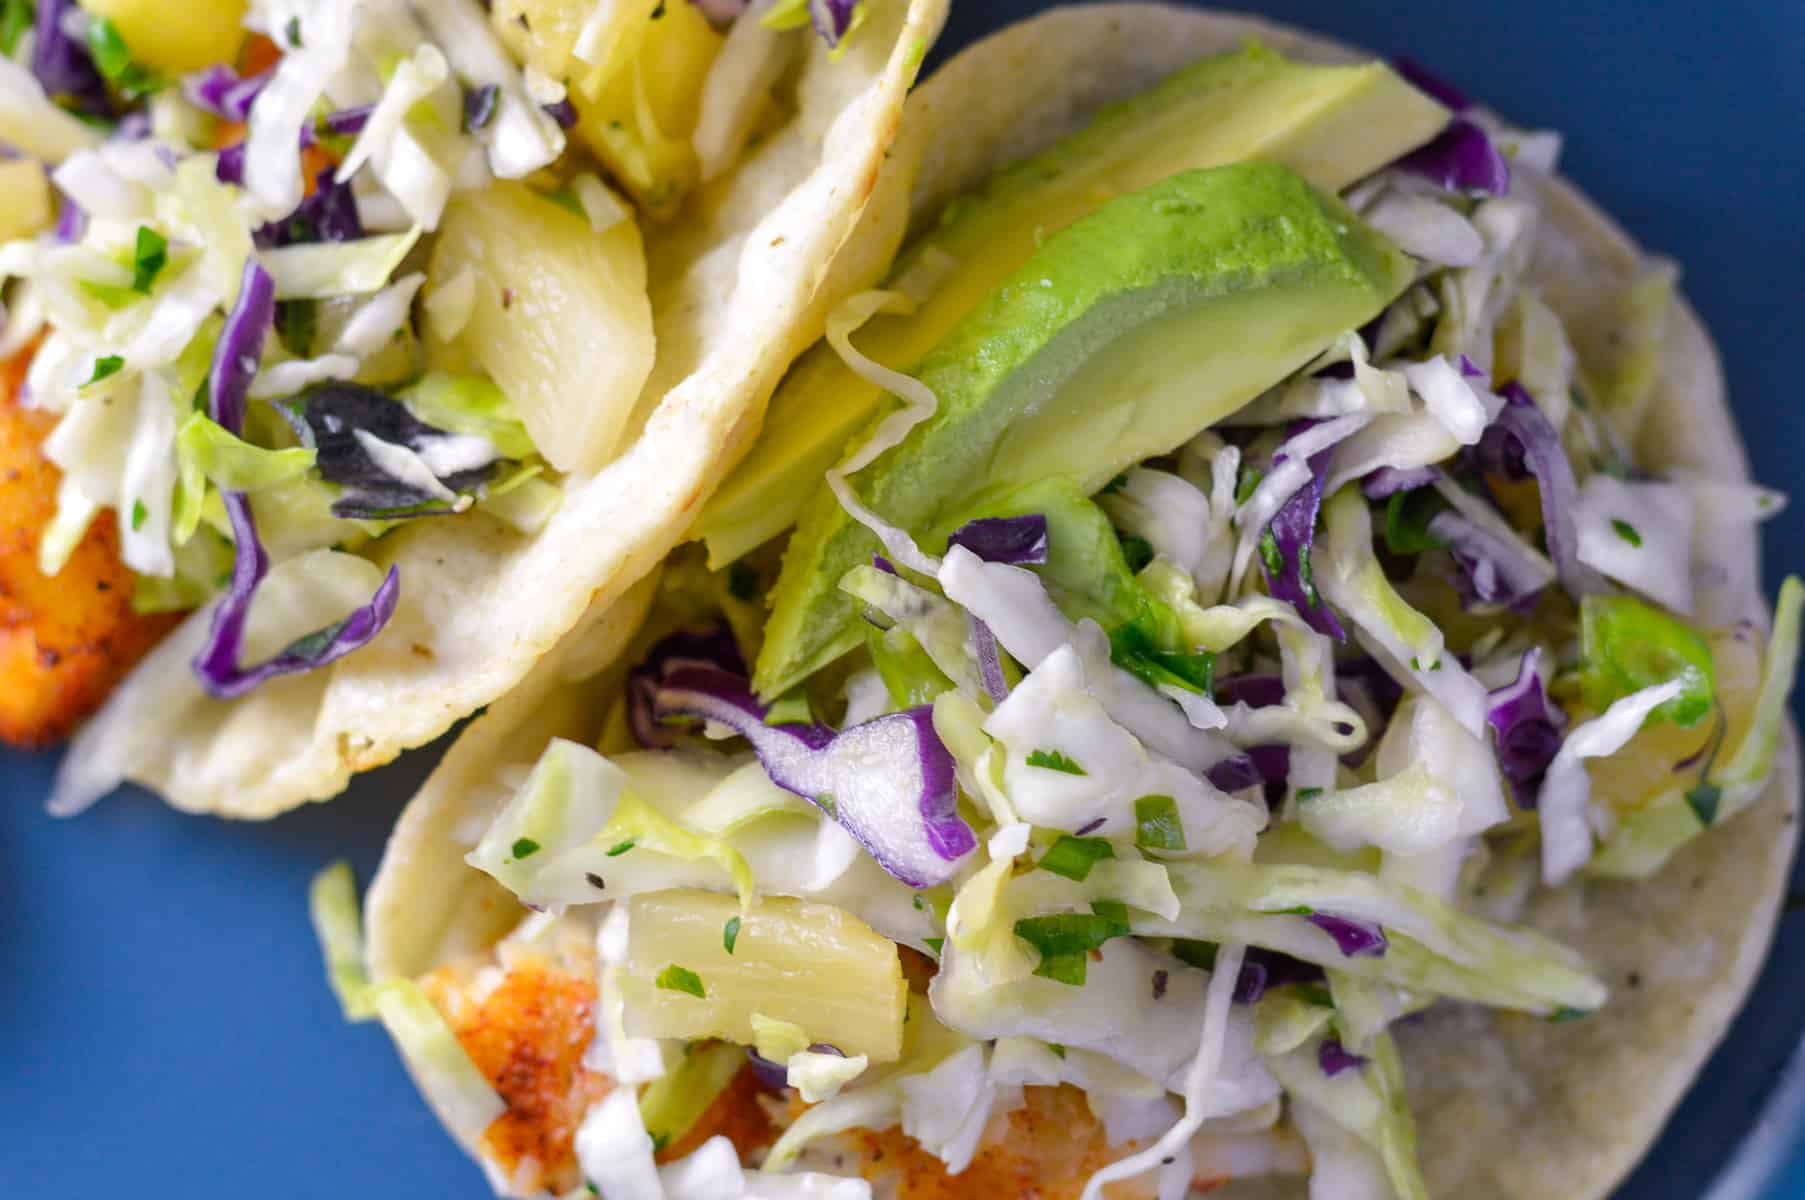 Up close shot of slaw on fish tacos with avocado on corn tortillas and plue plate